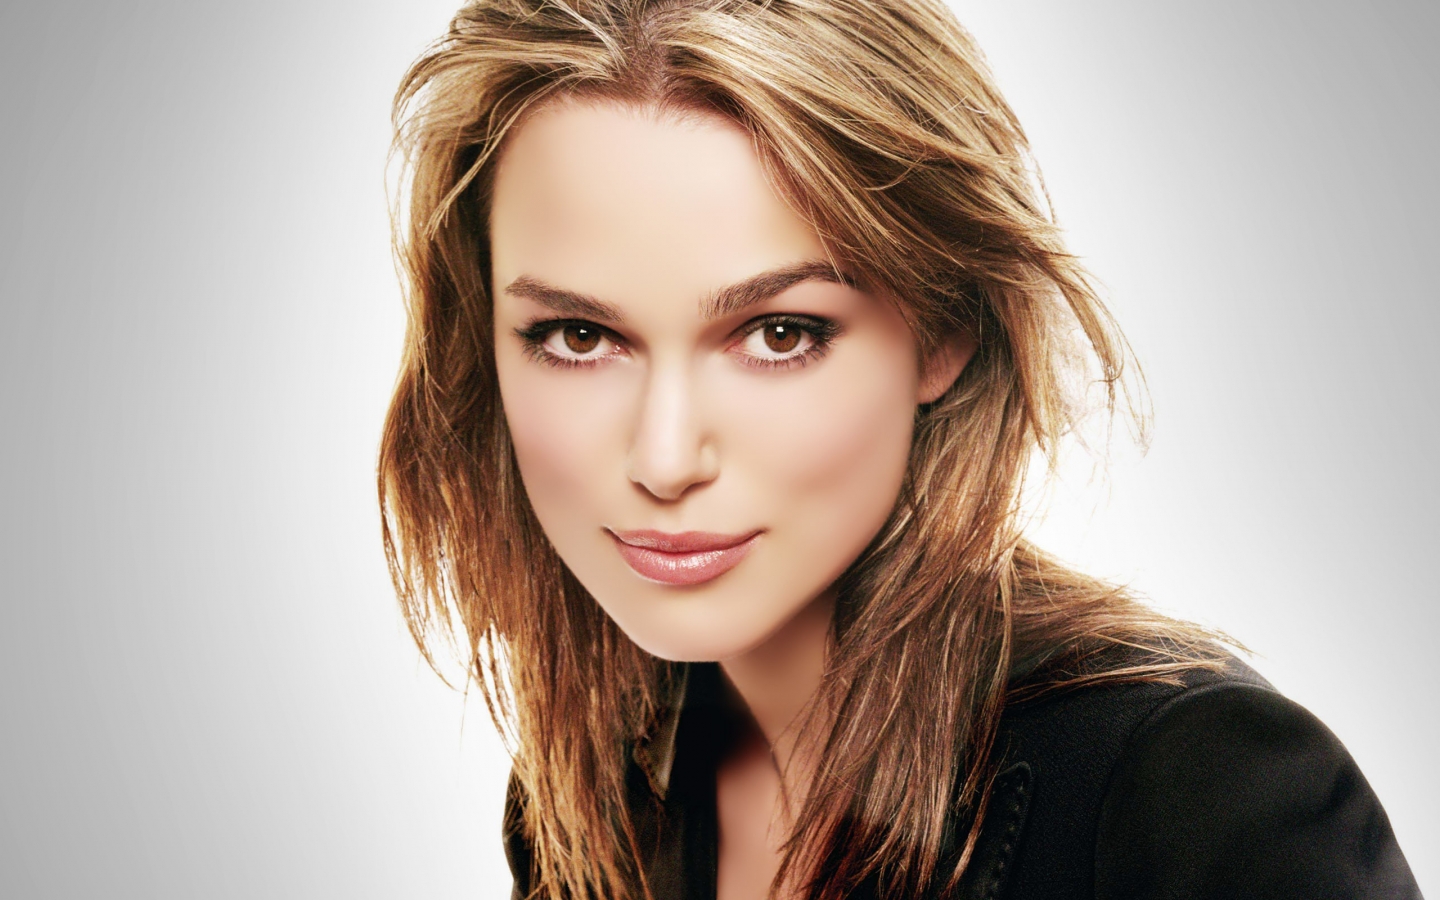 Beautiful Keira Knightley for 1440 x 900 widescreen resolution